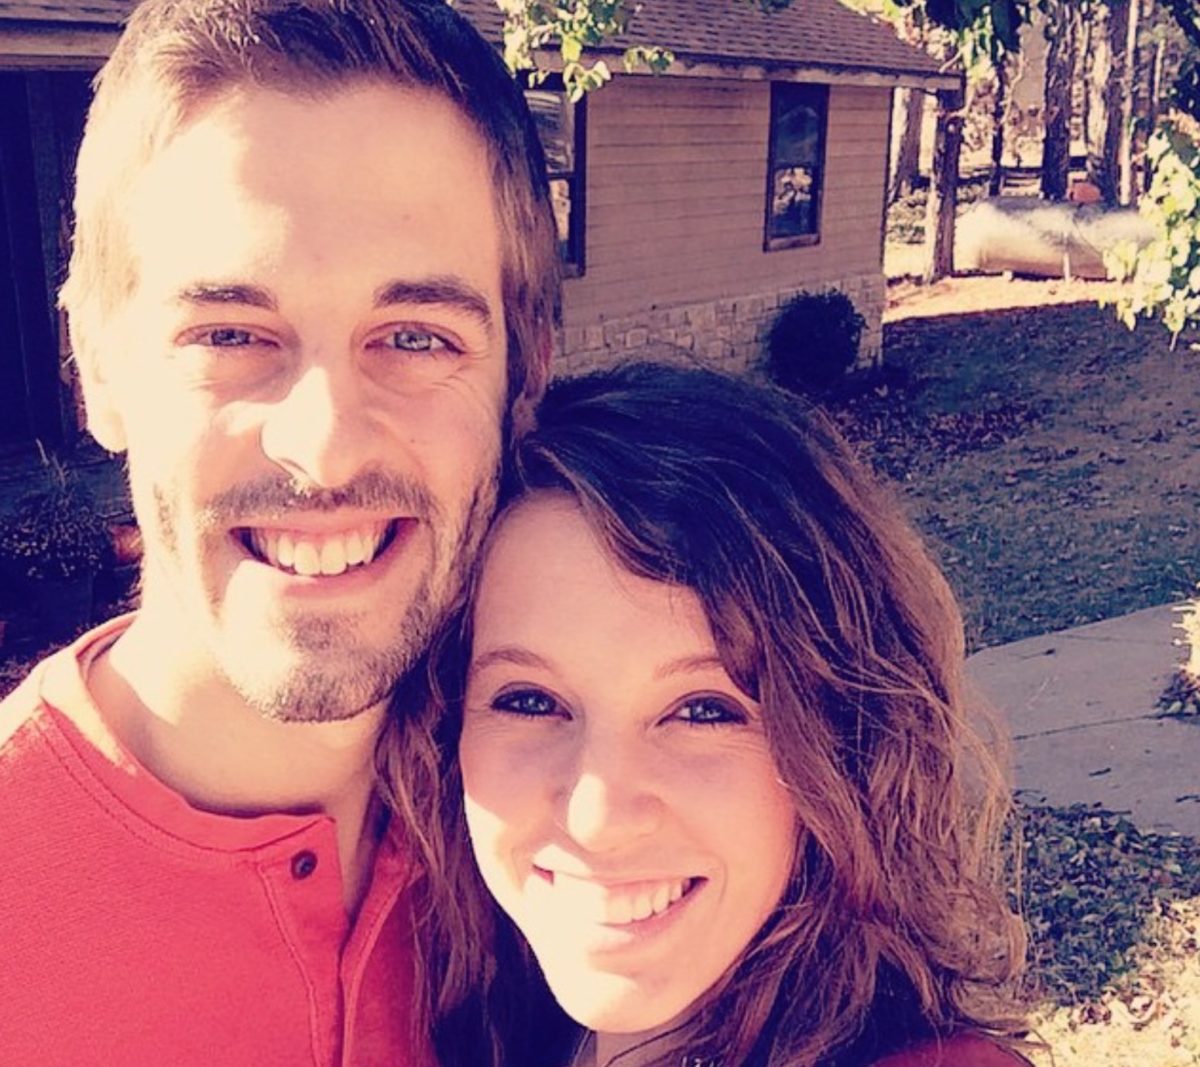 Jill Duggar Says She's Been 'Distancing' Herself From Family